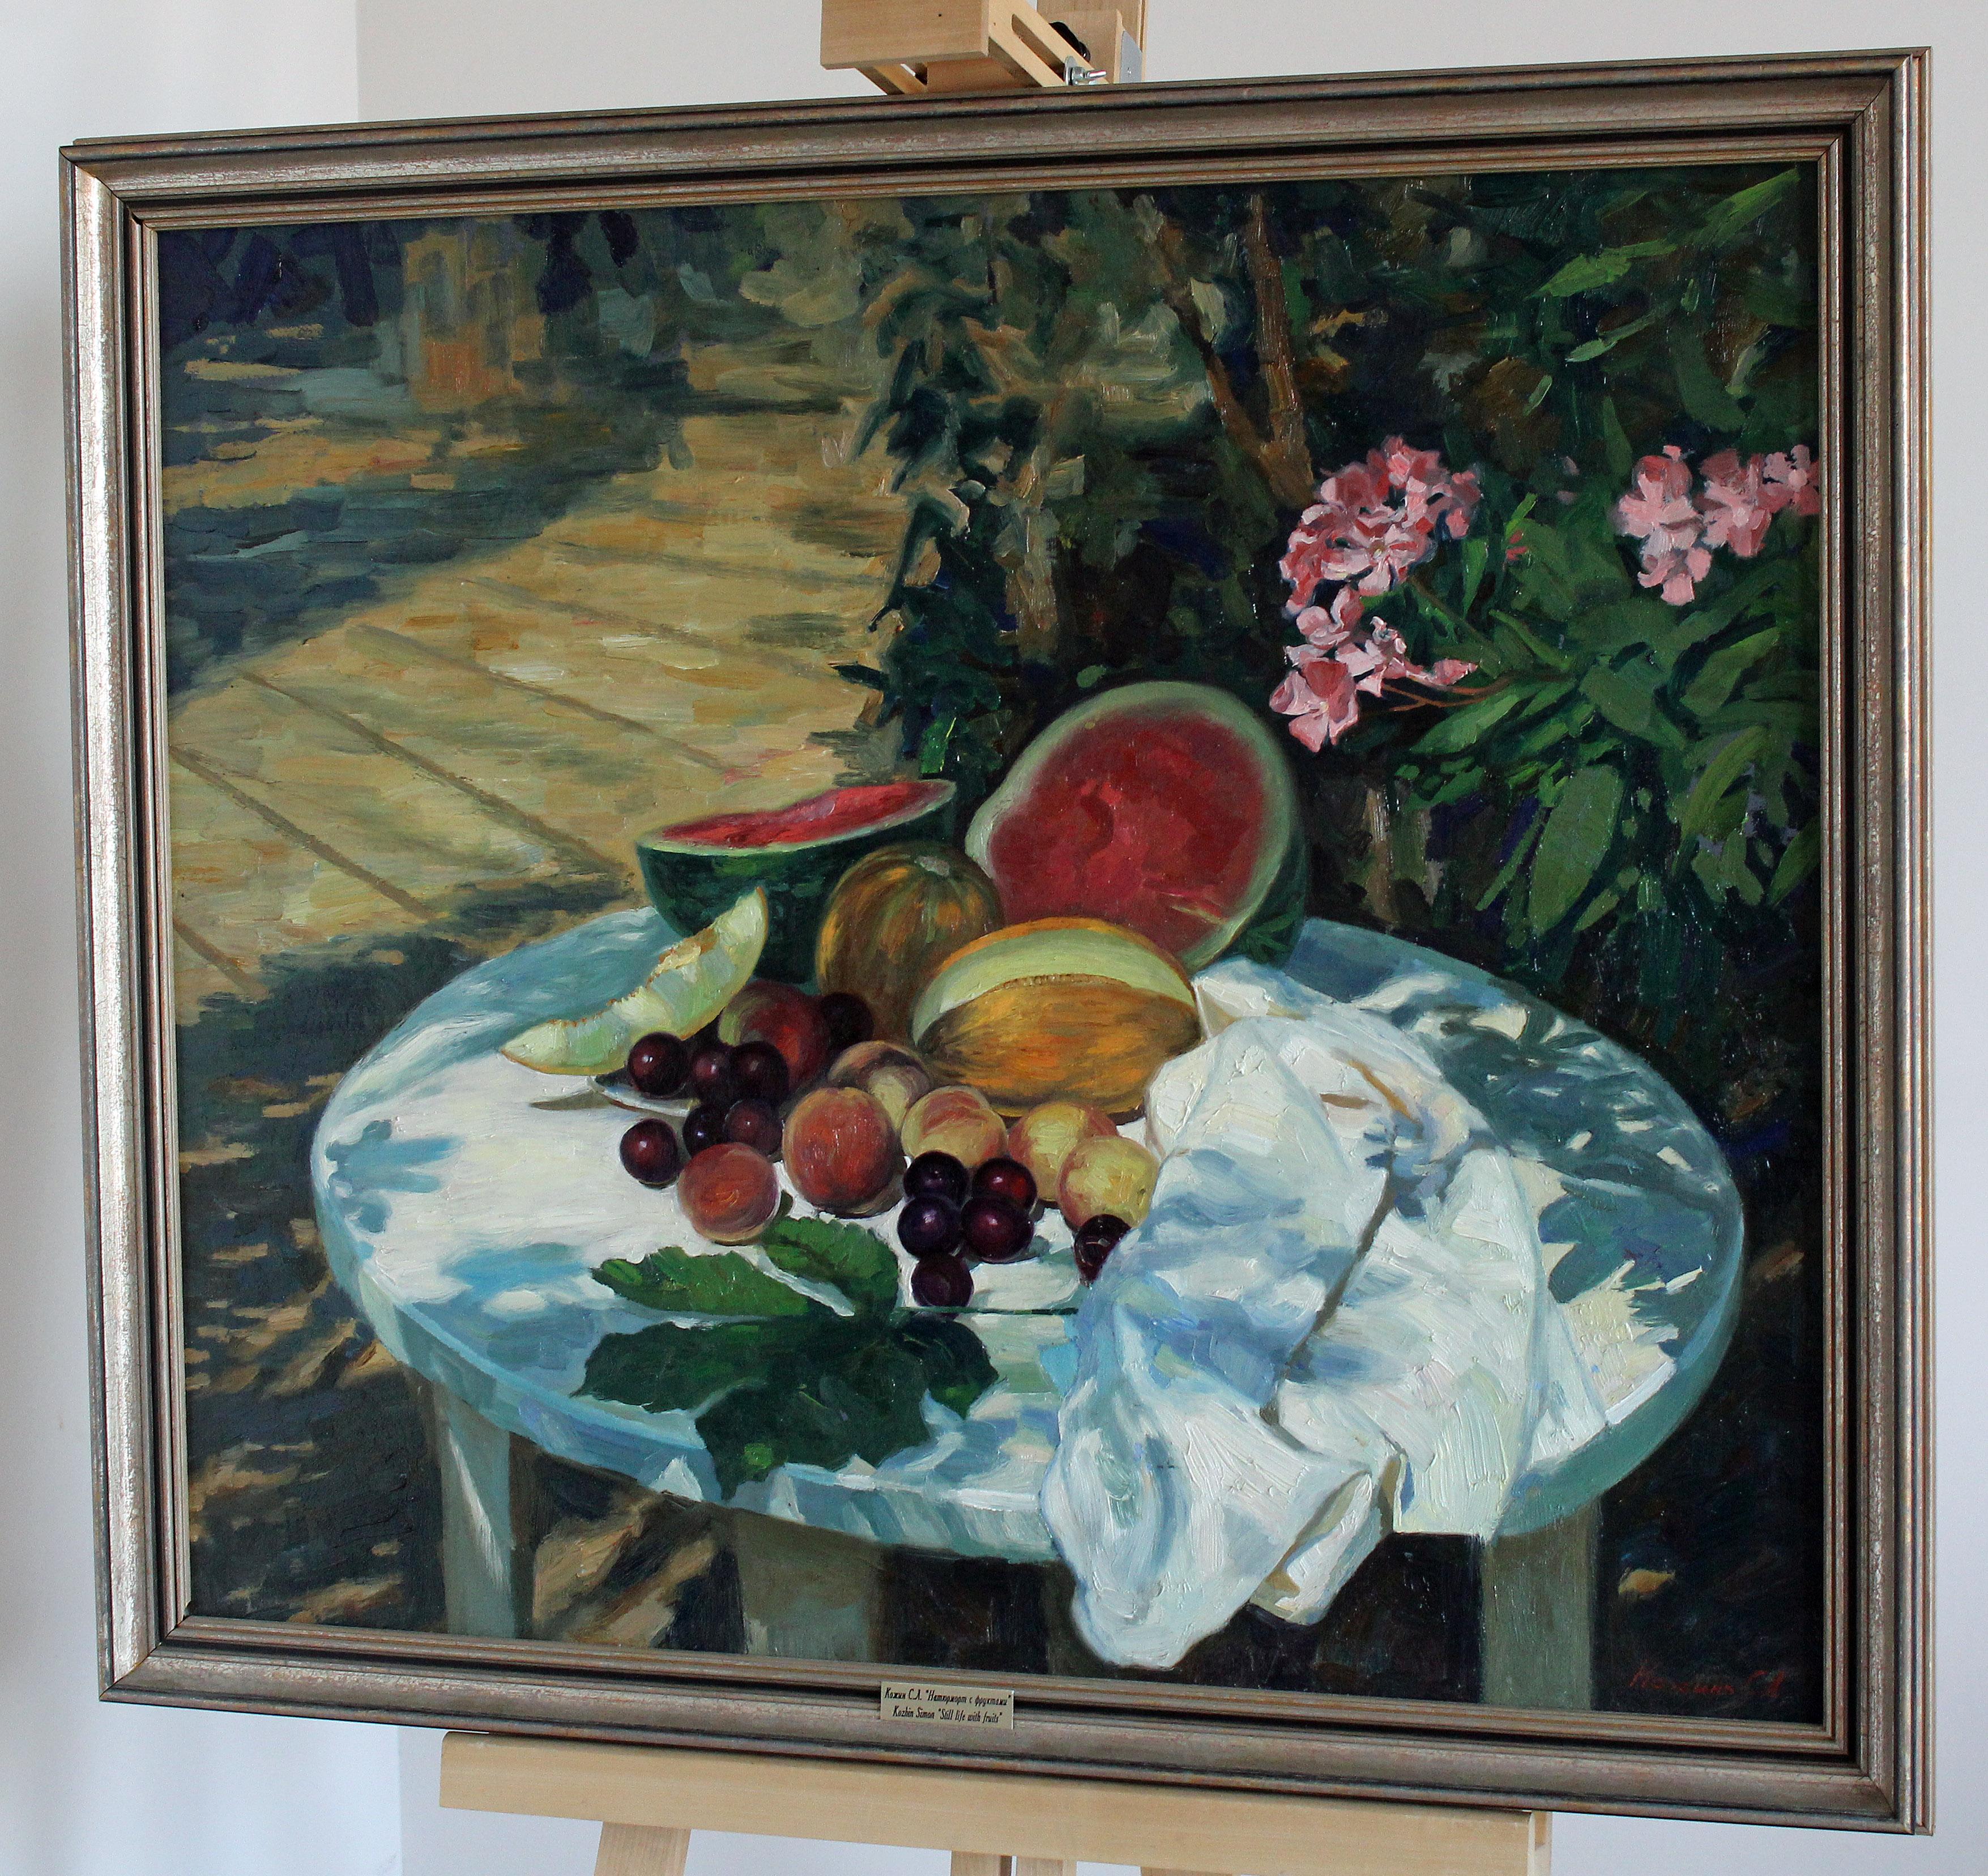 This work was painted in the open air in the shade of trees. It was hot and it was necessary to paint the picture quickly, as the fruit attracted wasps and could quickly deteriorate in the sun.
Exhibition:
2012 “Visible Images”, personal exhibition